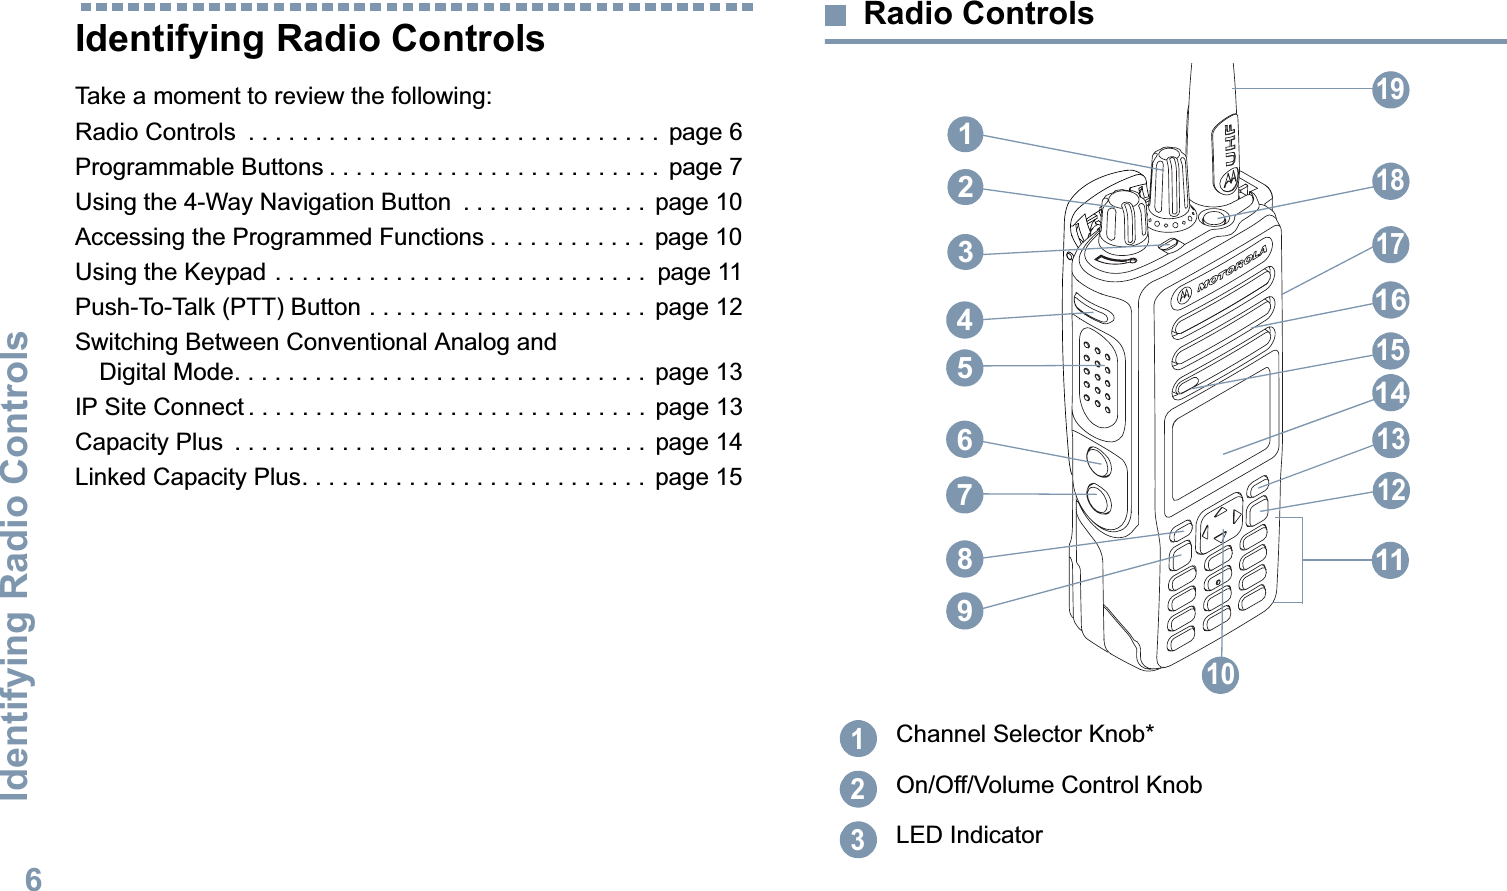 Identifying Radio ControlsEnglish6Identifying Radio ControlsTake a moment to review the following:Radio Controls  . . . . . . . . . . . . . . . . . . . . . . . . . . . . . . .  page 6Programmable Buttons . . . . . . . . . . . . . . . . . . . . . . . . .  page 7Using the 4-Way Navigation Button  . . . . . . . . . . . . . .  page 10Accessing the Programmed Functions . . . . . . . . . . . .  page 10Using the Keypad . . . . . . . . . . . . . . . . . . . . . . . . . . . .  page 11Push-To-Talk (PTT) Button . . . . . . . . . . . . . . . . . . . . .  page 12Switching Between Conventional Analog and Digital Mode. . . . . . . . . . . . . . . . . . . . . . . . . . . . . . .  page 13IP Site Connect . . . . . . . . . . . . . . . . . . . . . . . . . . . . . .  page 13Capacity Plus  . . . . . . . . . . . . . . . . . . . . . . . . . . . . . . .  page 14Linked Capacity Plus. . . . . . . . . . . . . . . . . . . . . . . . . .  page 15Radio ControlsChannel Selector Knob* On/Off/Volume Control KnobLED Indicator14315171087652111184161319912123